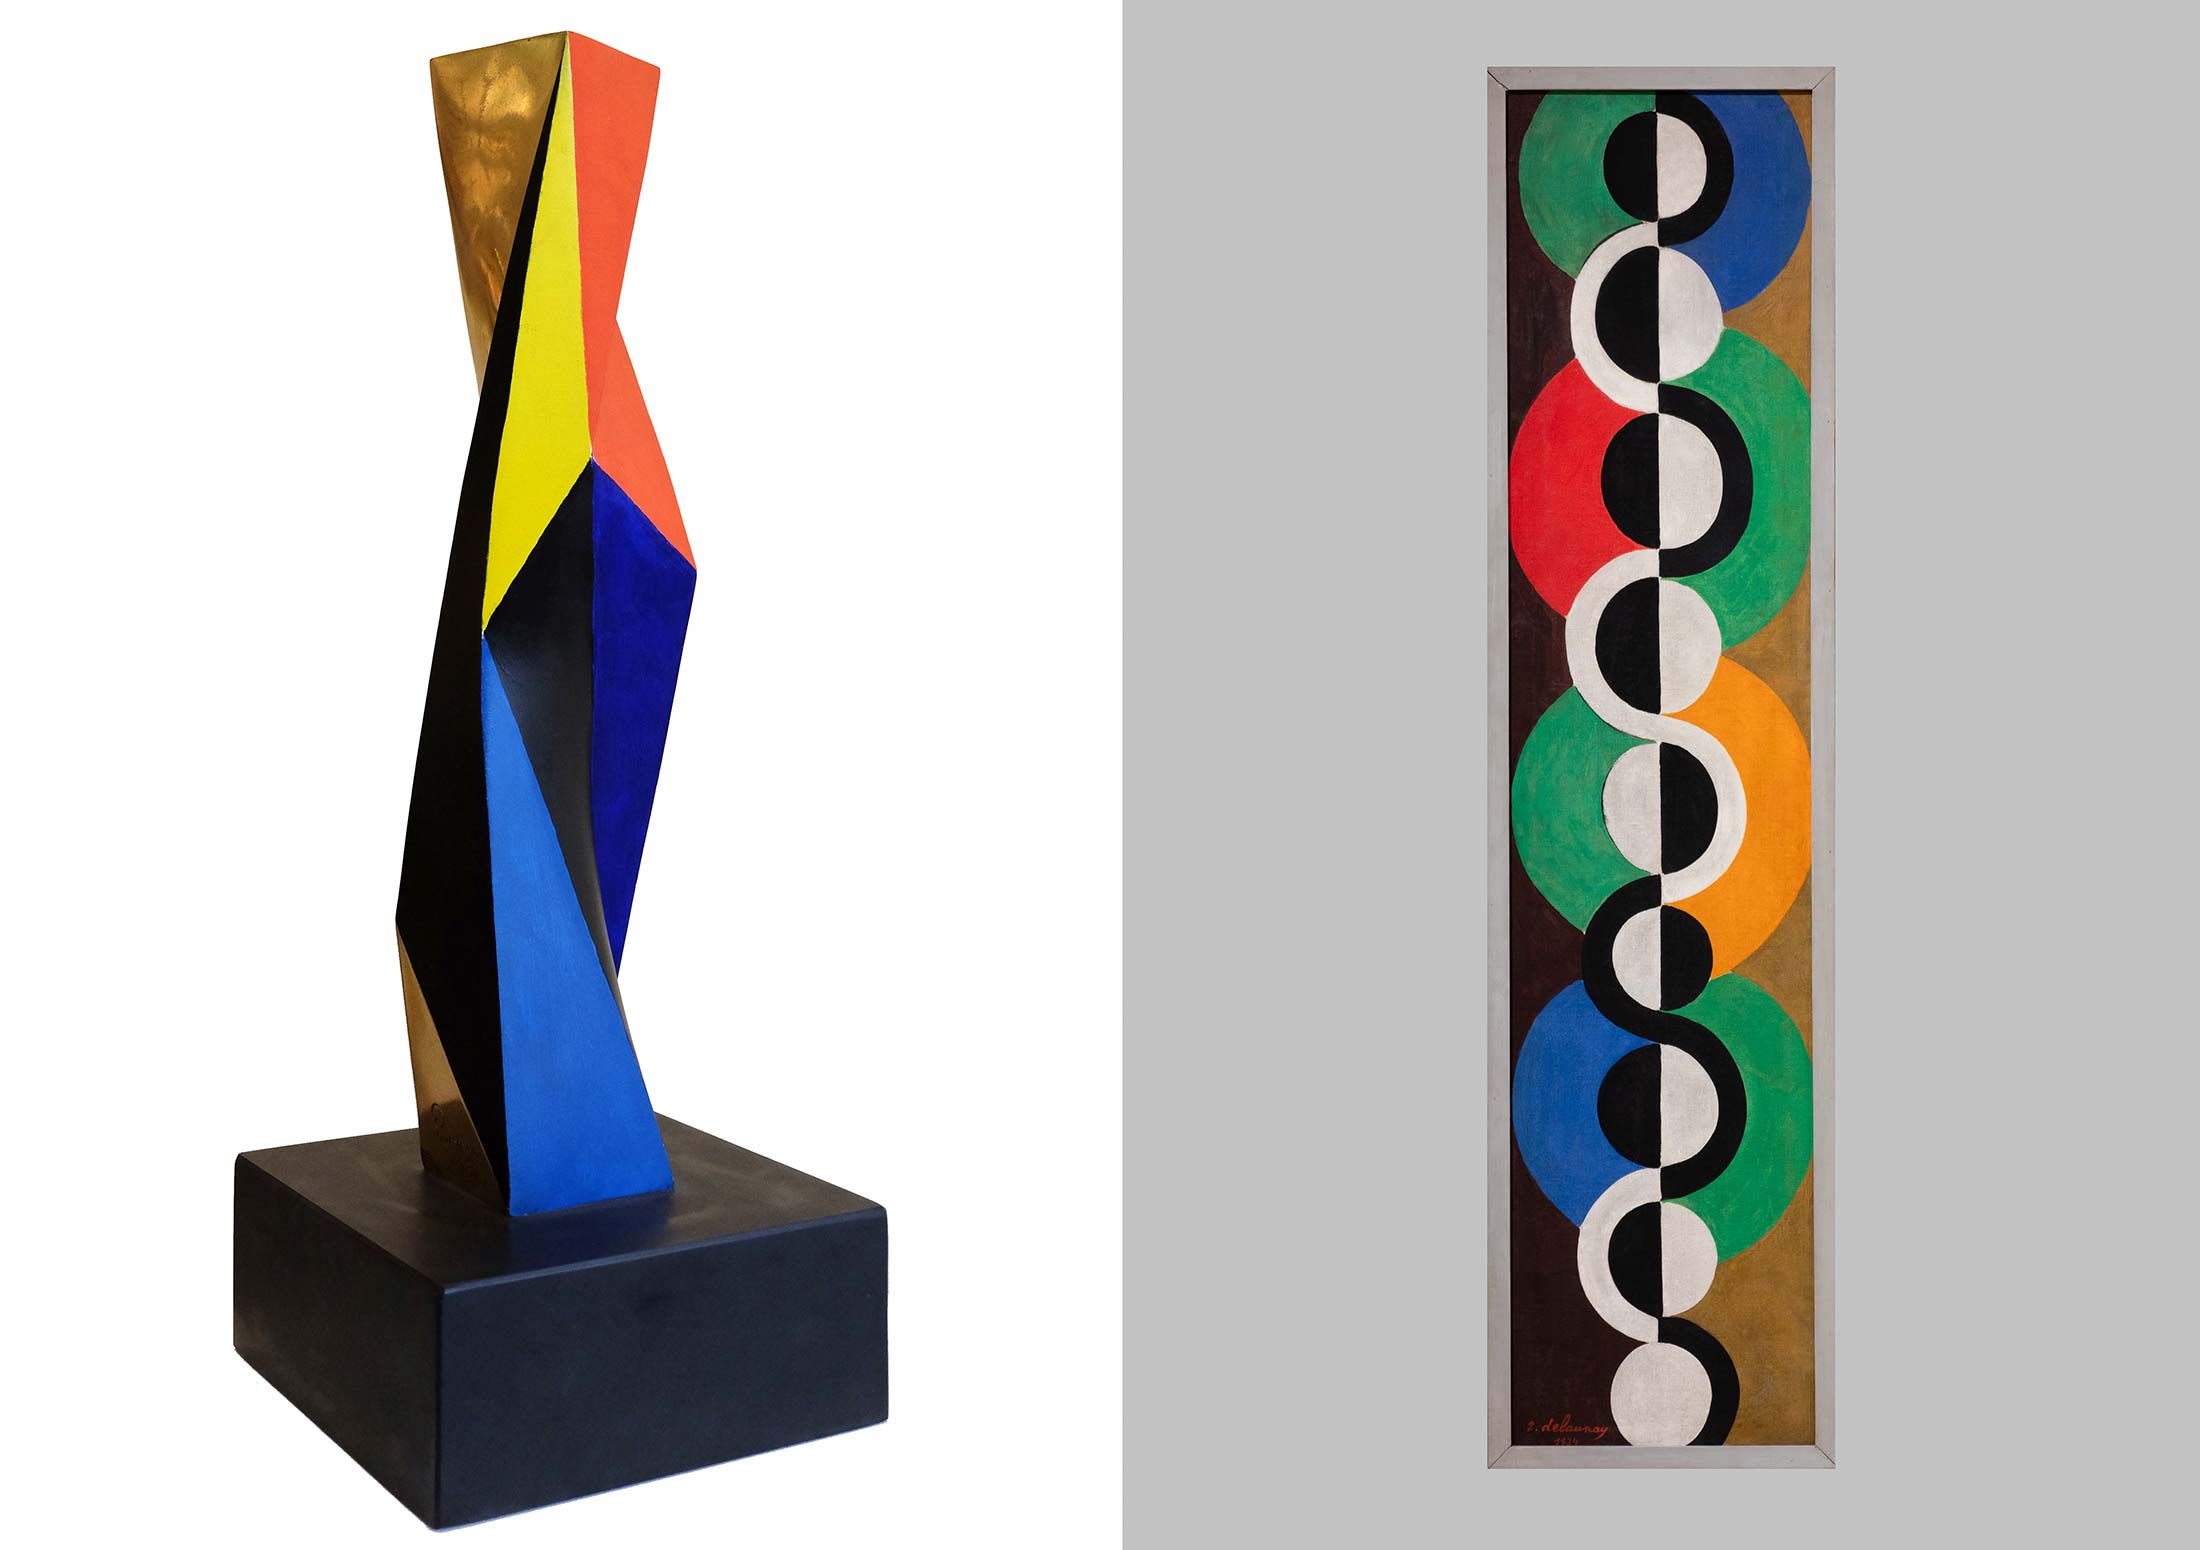 On the left: Colonne (1932) by Anton Prinner; on the right: Rhythm San Fin (1934)by Robert Delaunay